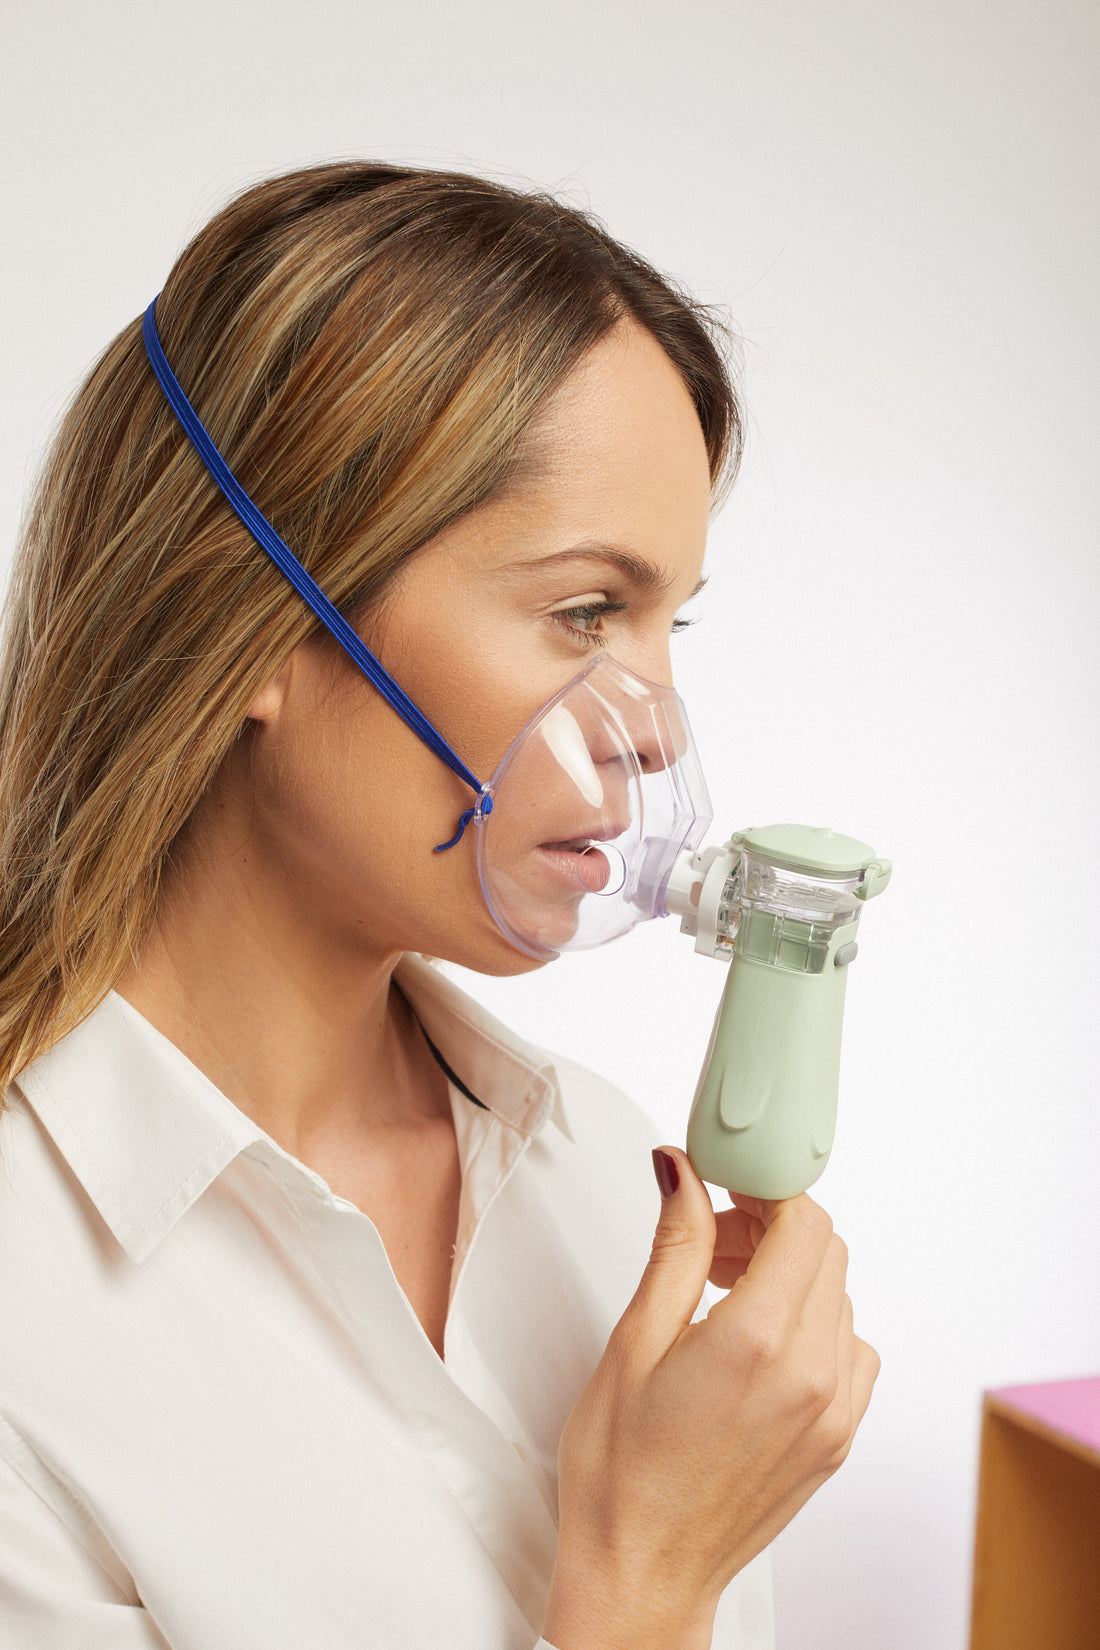 Everything you need to know about asthma